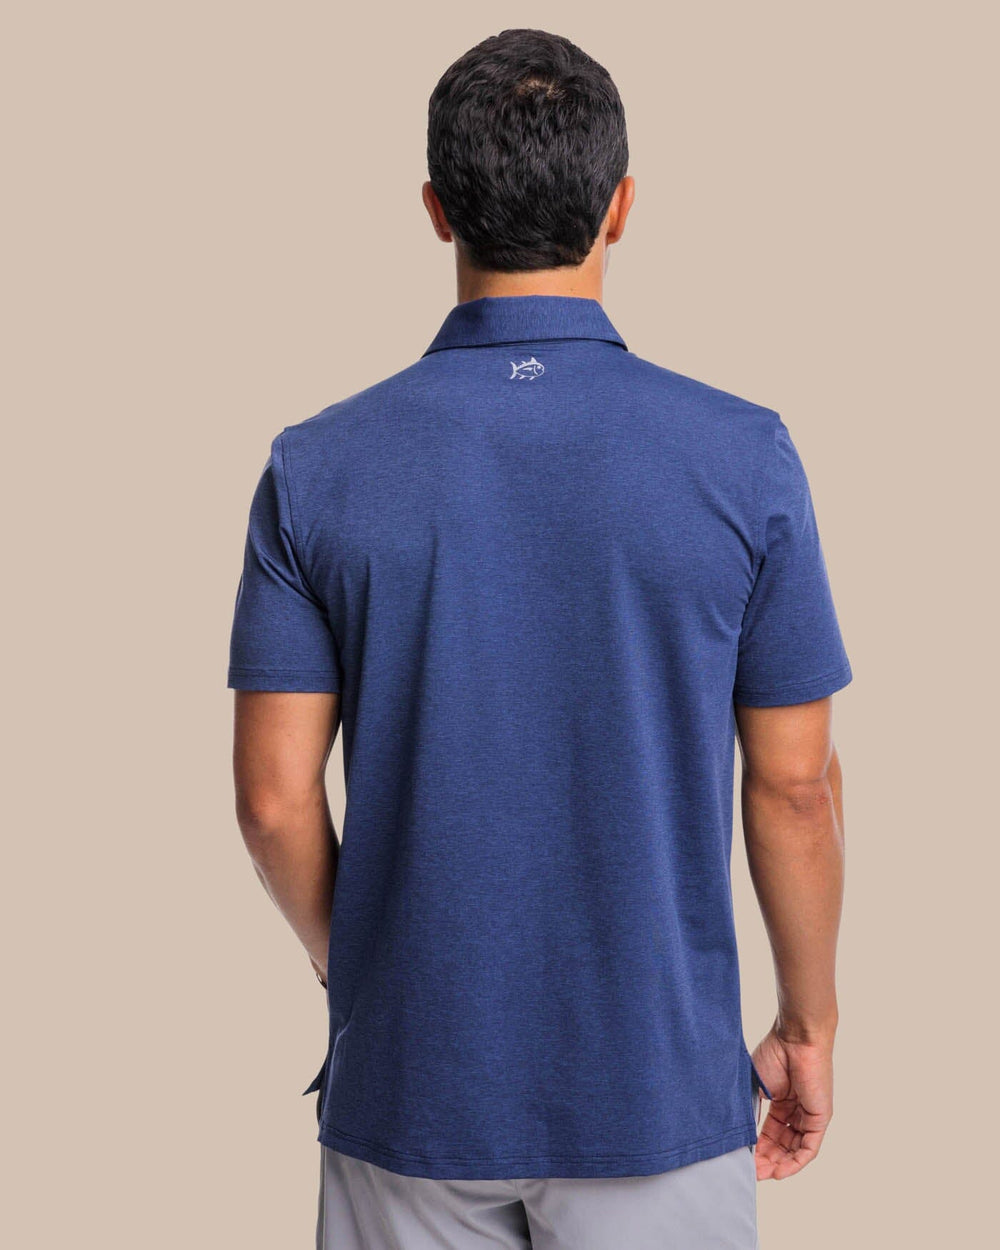 The back view of the brrr°®-eeze Heather Performance Polo Shirt by Southern Tide - Heather Nautical Navy